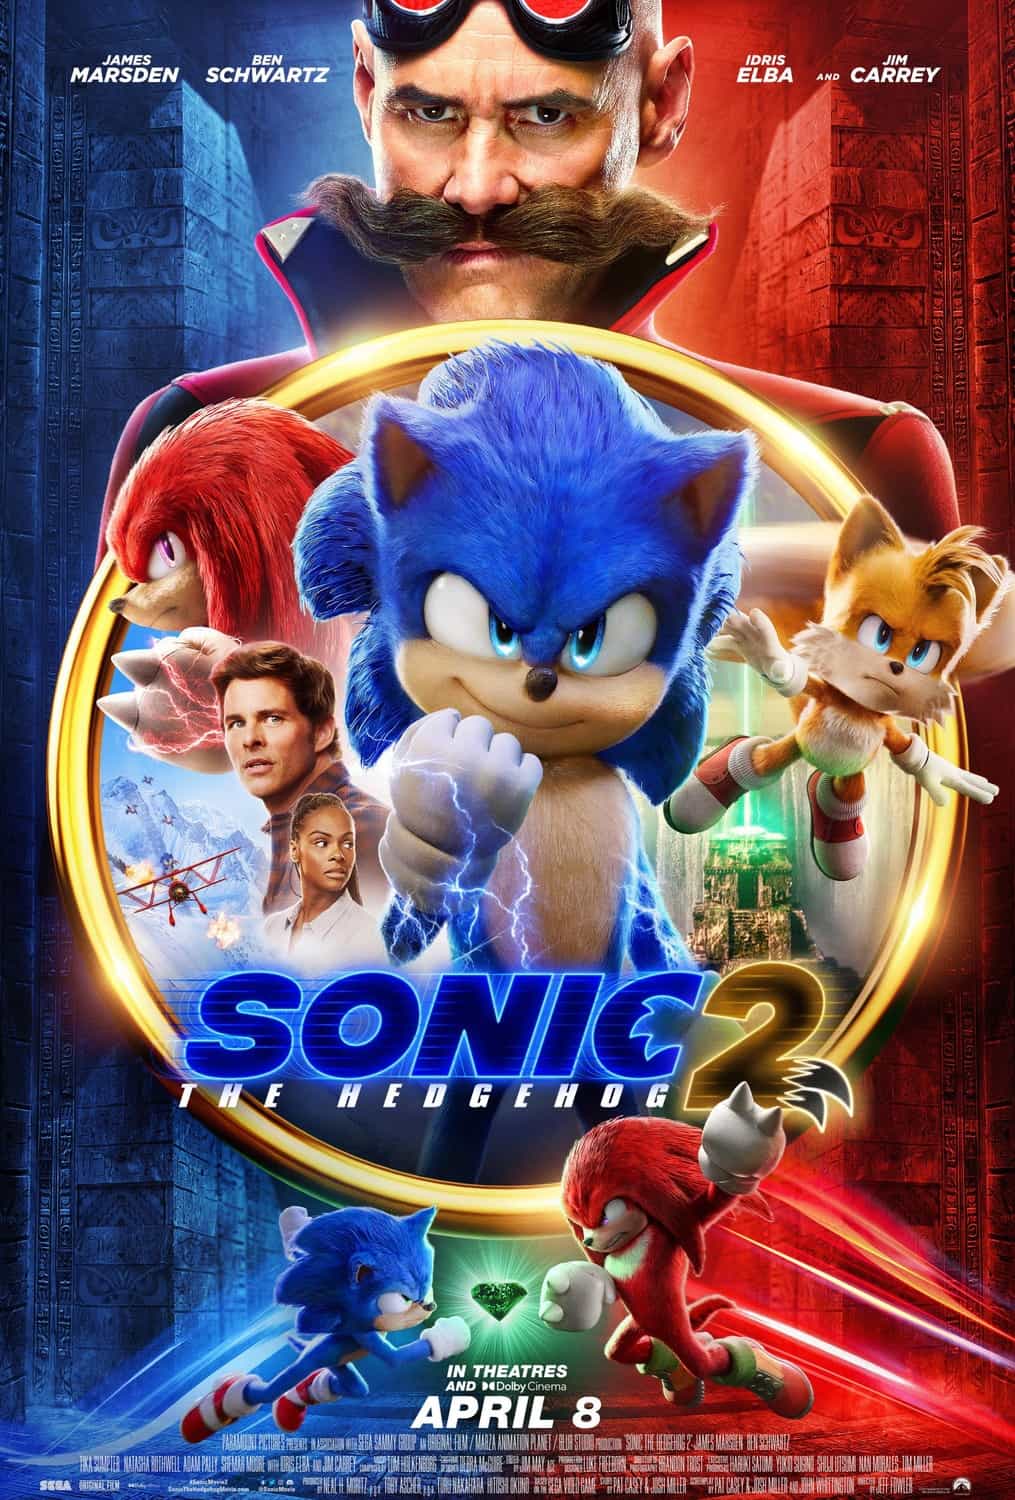 New poster released for Sonic the Hedgehog 2 which stars Ben Schwartz - the movie is released 8th April 2022